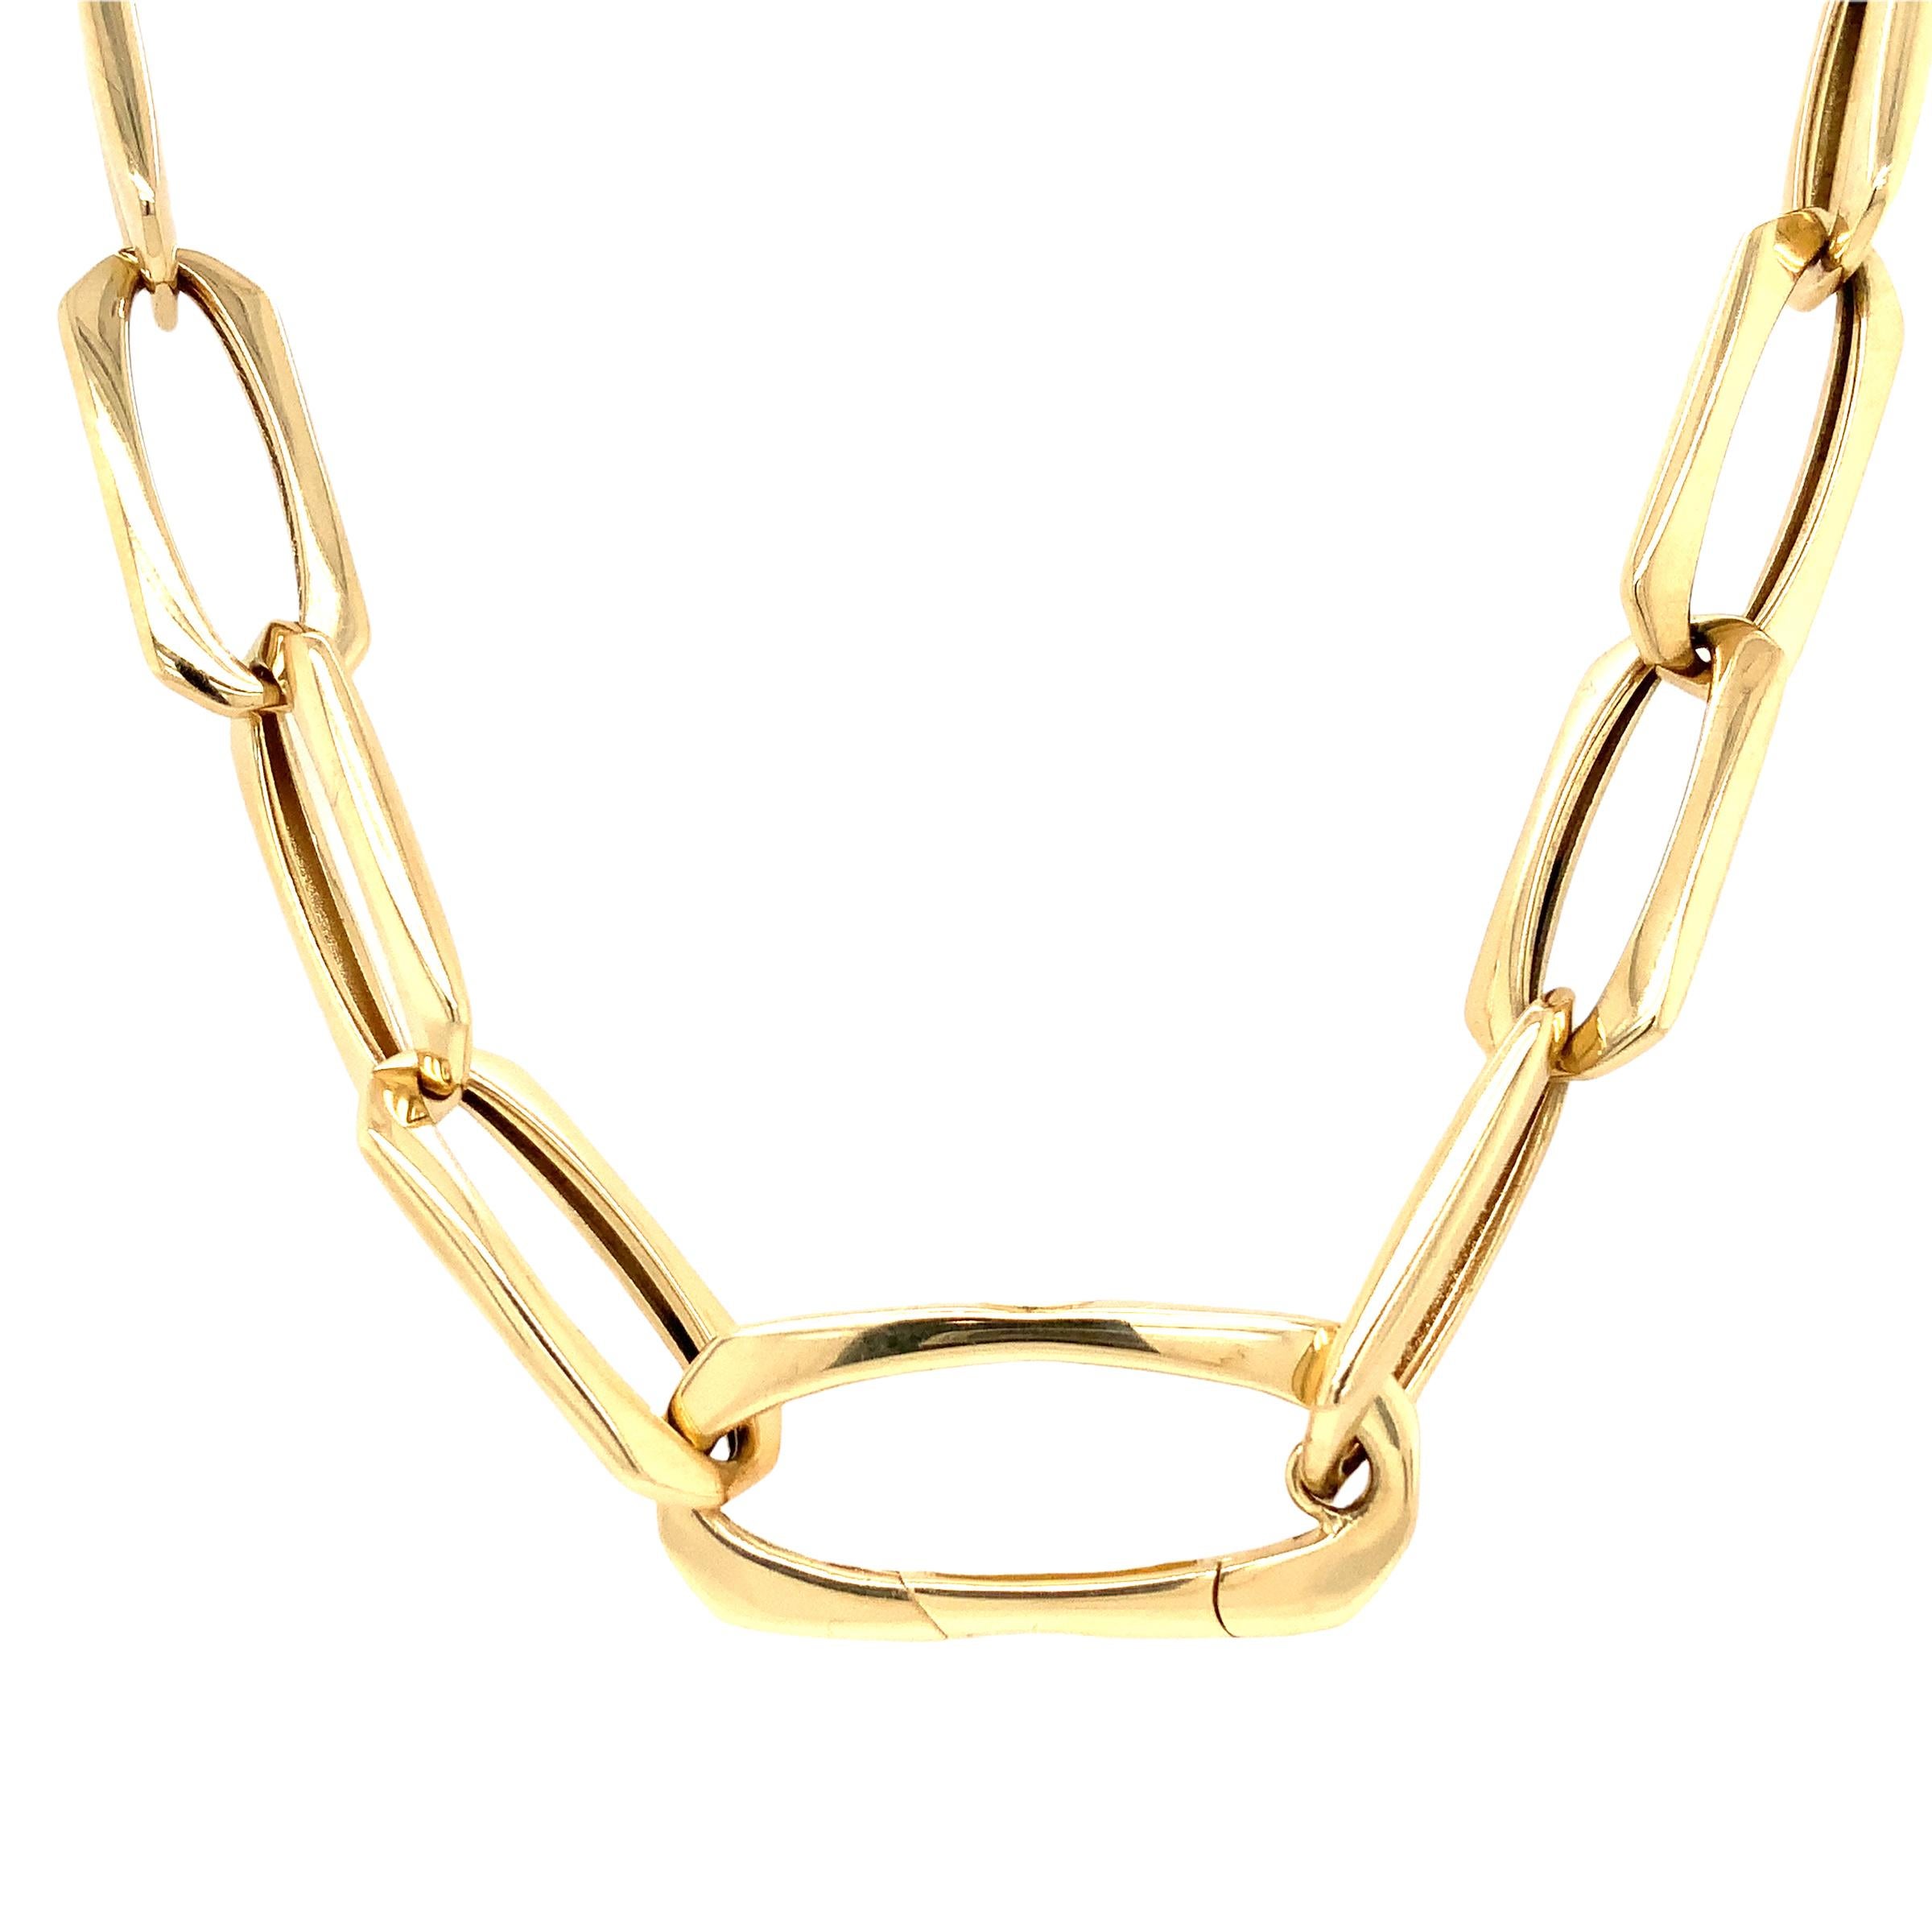 Afarin Collection Pavé Diamond 1.72 cts Paperclip Necklace Set in 18K Yellow Gold

18